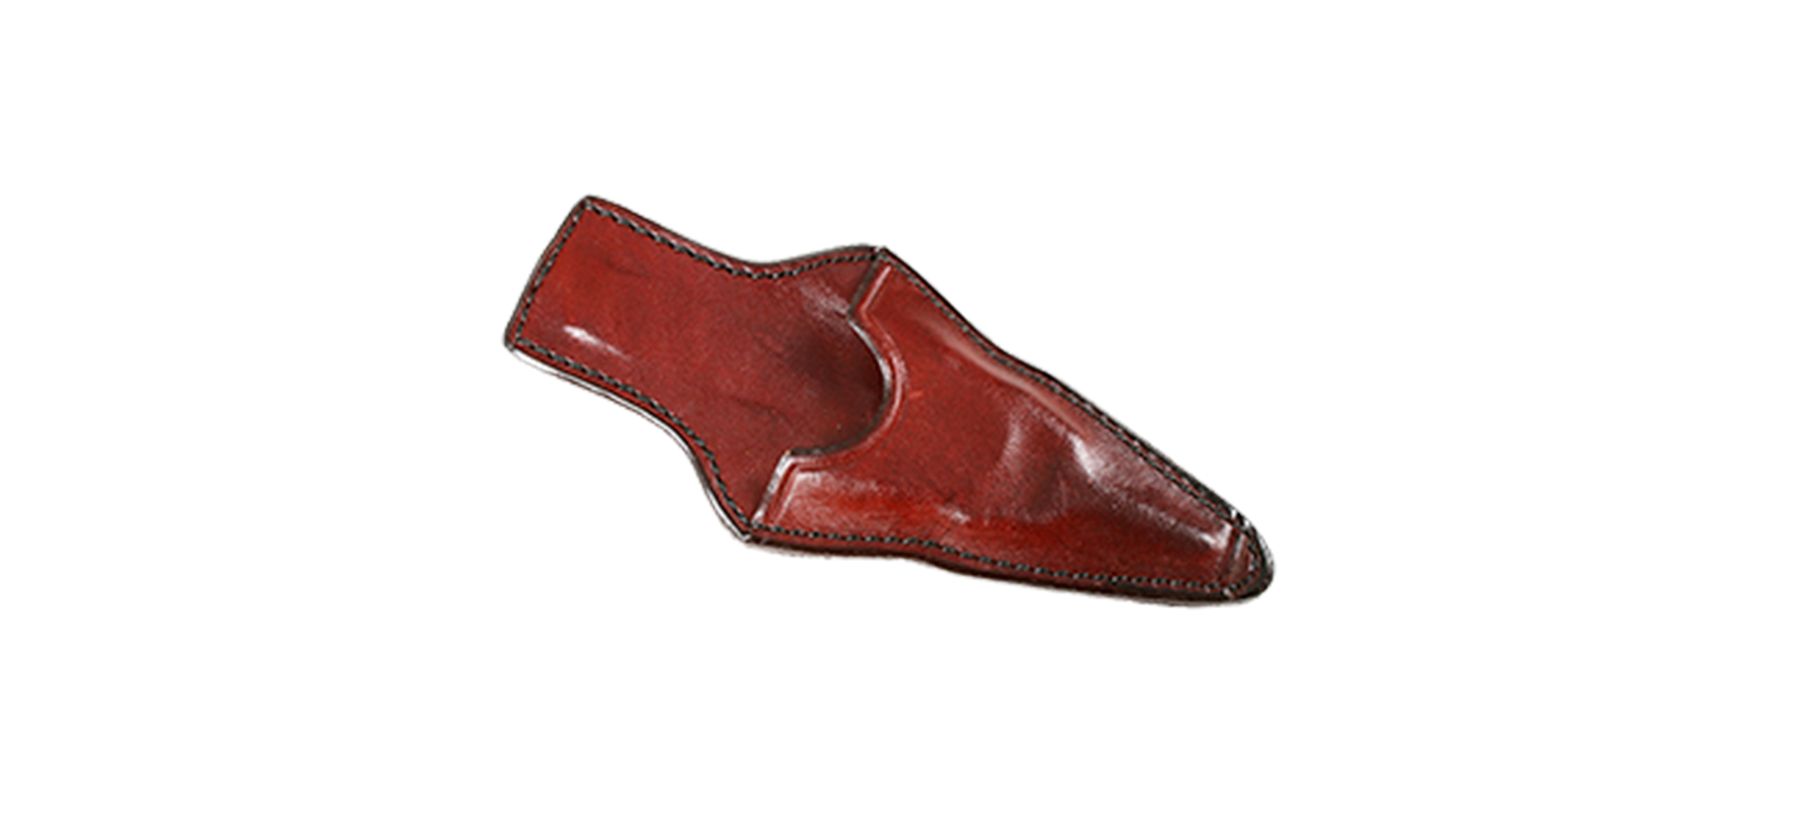 Donnmar Leather Sheath & Tether Combo